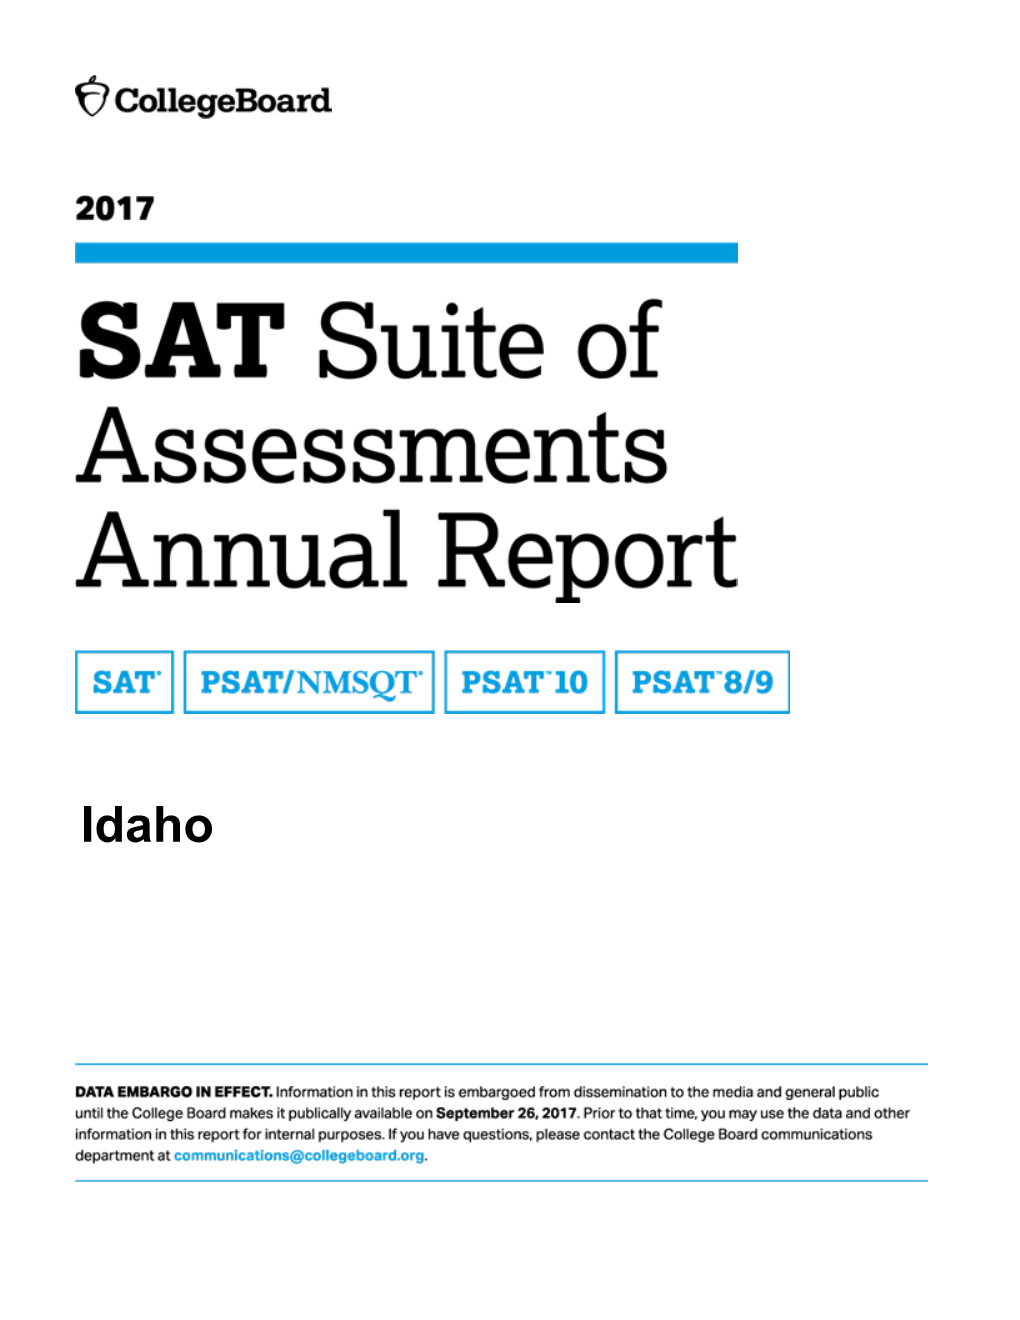 2017 Idaho SAT Suite of Assessments Annual Report